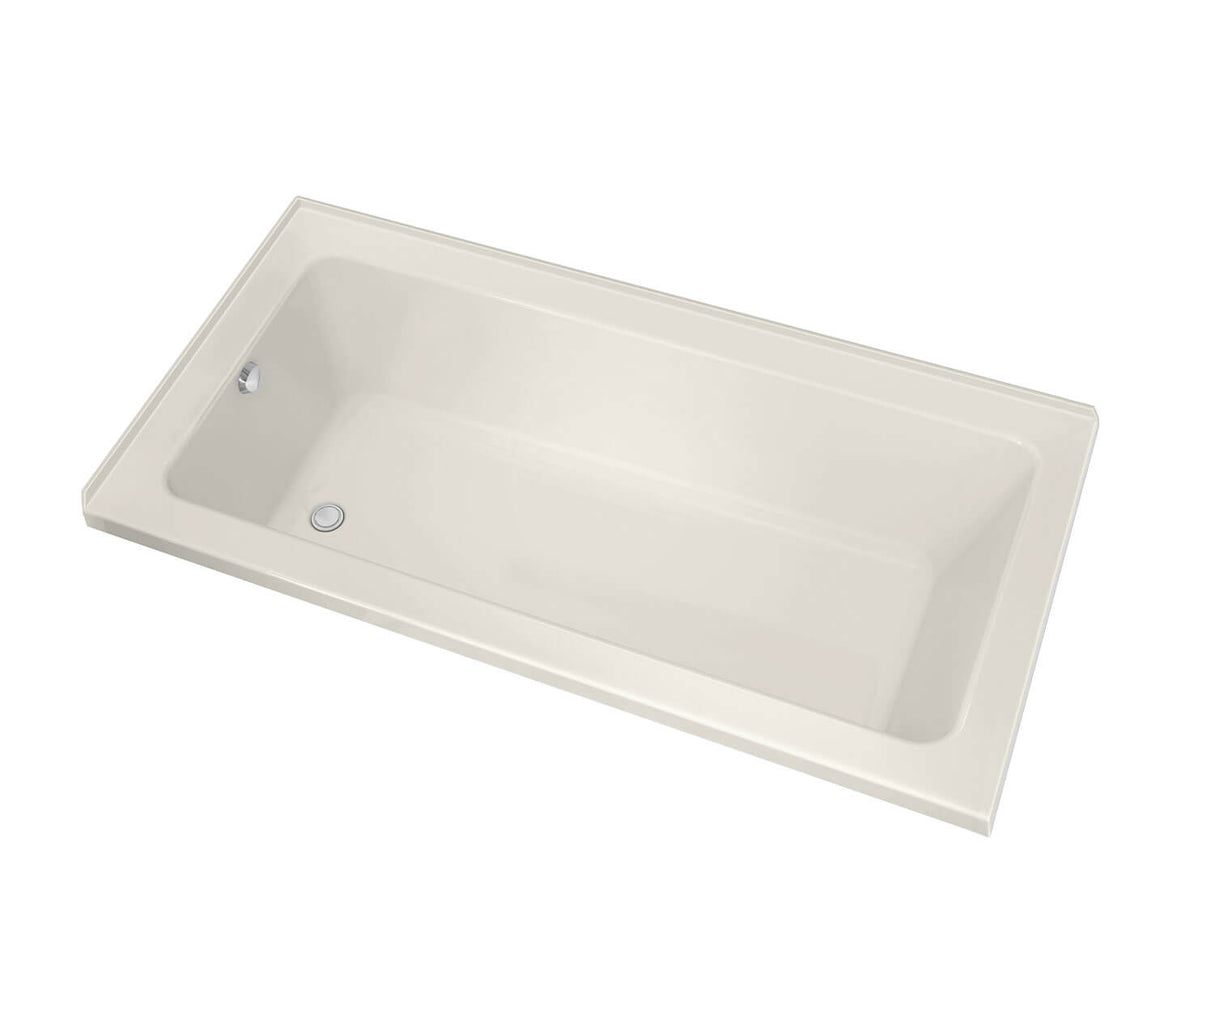 MAAX 106214-R-097-007 Pose 7242 IF Acrylic Corner Left Right-Hand Drain Combined Whirlpool & Aeroeffect Bathtub in Biscuit